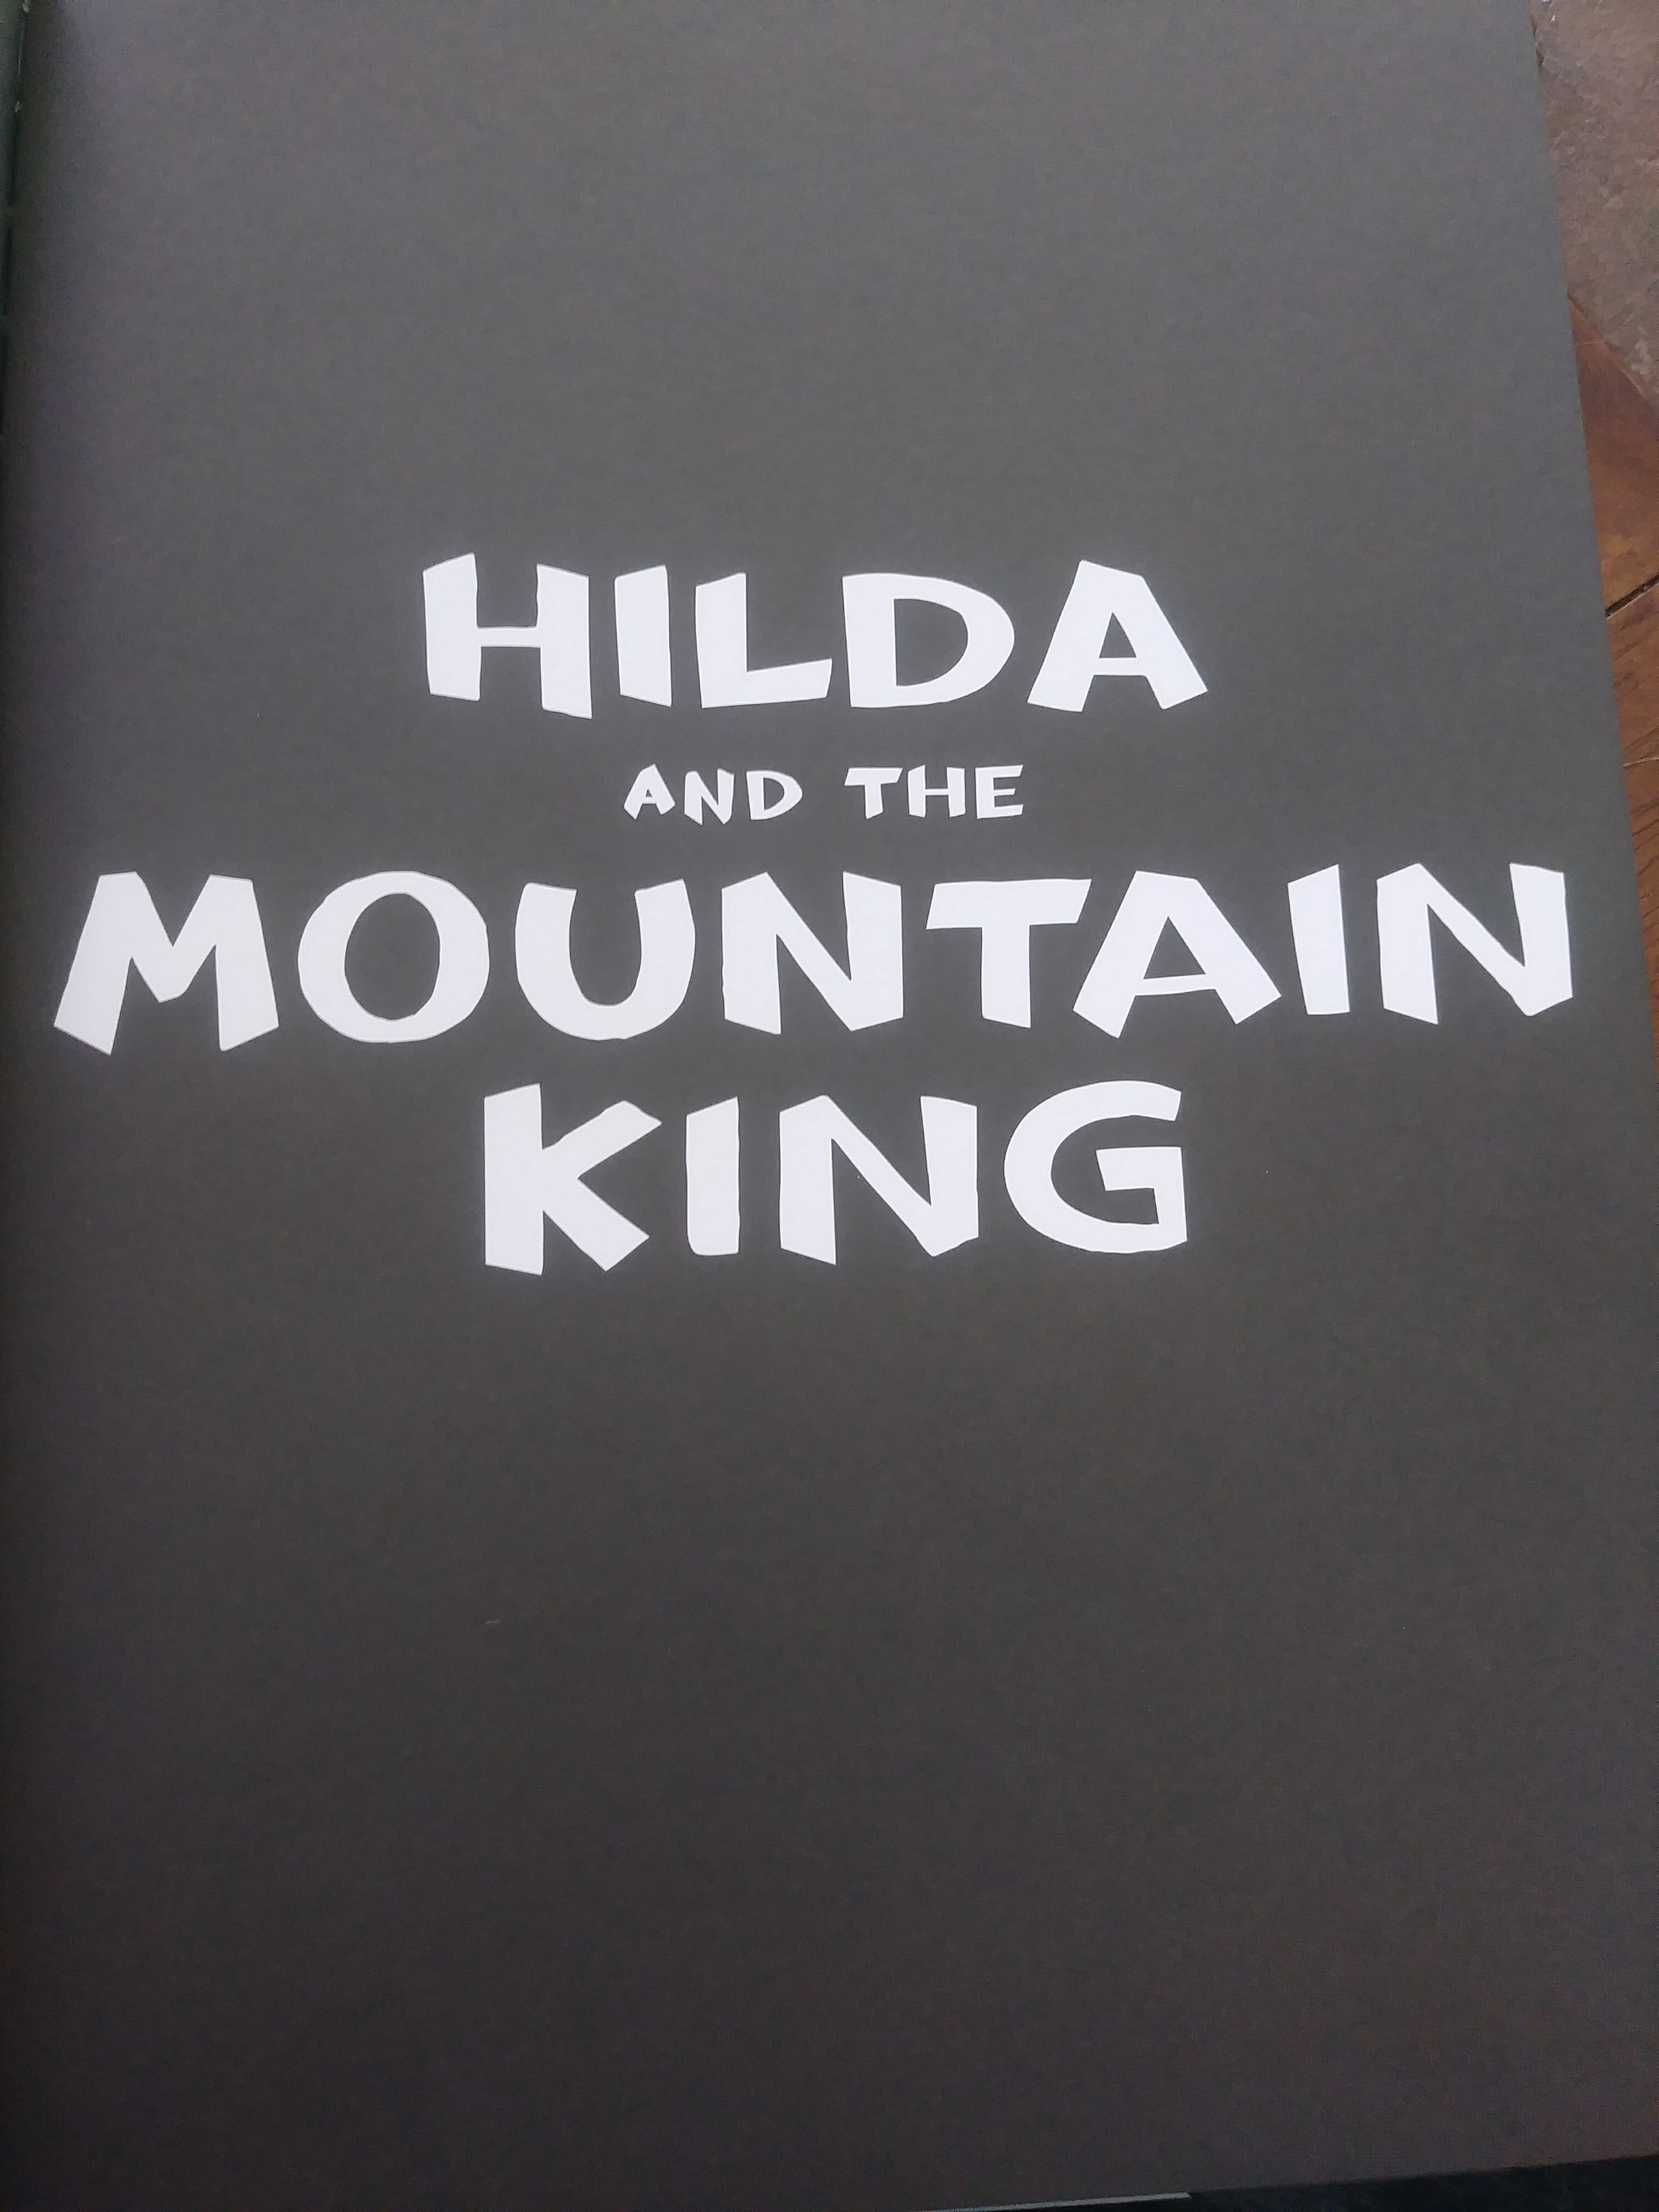 Read online Hilda and the Mountain King comic -  Issue # TPB - 7